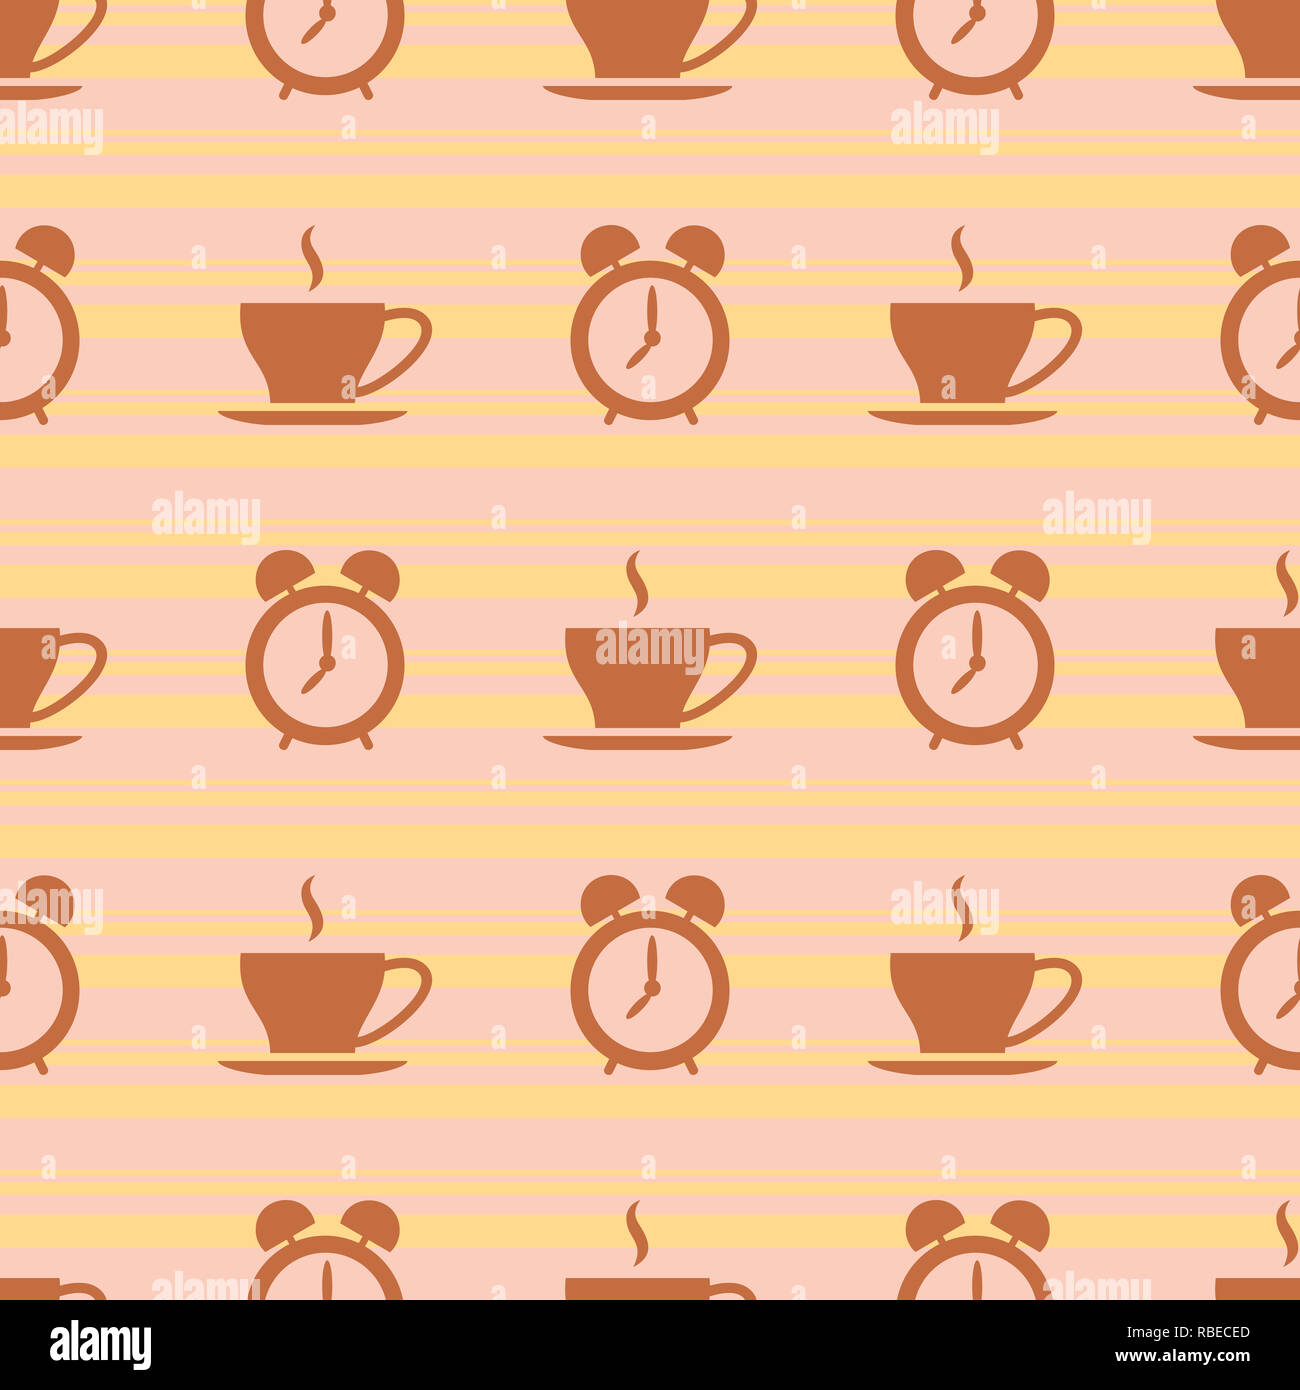 Seamless morning pattern with alarm clocks and cups Stock Photo